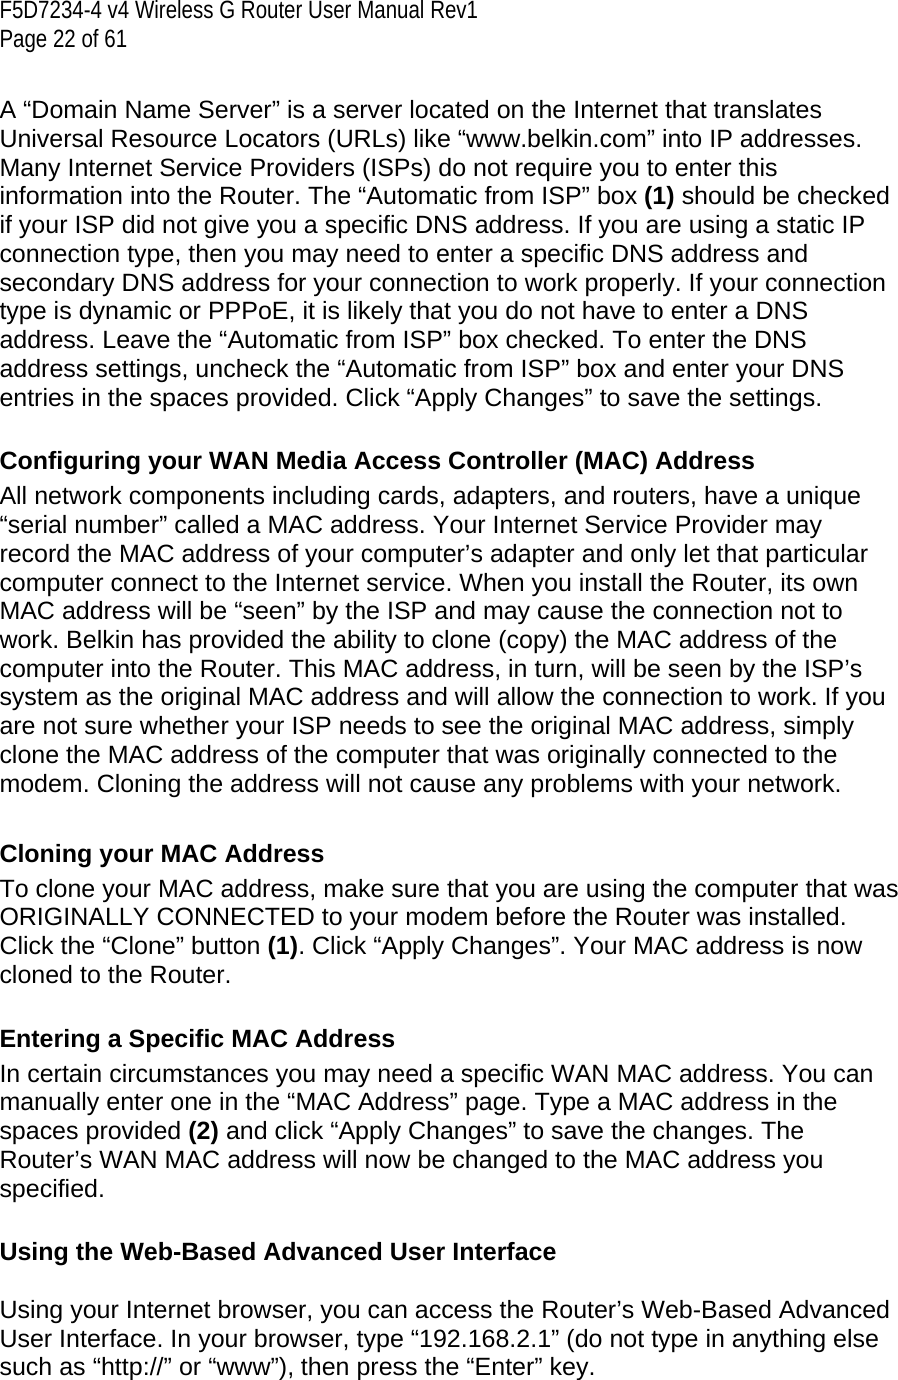 F5D7234-4 v4 Wireless G Router User Manual Rev1  Page 22 of 61   A “Domain Name Server” is a server located on the Internet that translates Universal Resource Locators (URLs) like “www.belkin.com” into IP addresses. Many Internet Service Providers (ISPs) do not require you to enter this information into the Router. The “Automatic from ISP” box (1) should be checked if your ISP did not give you a specific DNS address. If you are using a static IP connection type, then you may need to enter a specific DNS address and secondary DNS address for your connection to work properly. If your connection type is dynamic or PPPoE, it is likely that you do not have to enter a DNS address. Leave the “Automatic from ISP” box checked. To enter the DNS address settings, uncheck the “Automatic from ISP” box and enter your DNS entries in the spaces provided. Click “Apply Changes” to save the settings.  Configuring your WAN Media Access Controller (MAC) Address All network components including cards, adapters, and routers, have a unique “serial number” called a MAC address. Your Internet Service Provider may record the MAC address of your computer’s adapter and only let that particular computer connect to the Internet service. When you install the Router, its own MAC address will be “seen” by the ISP and may cause the connection not to work. Belkin has provided the ability to clone (copy) the MAC address of the computer into the Router. This MAC address, in turn, will be seen by the ISP’s system as the original MAC address and will allow the connection to work. If you are not sure whether your ISP needs to see the original MAC address, simply clone the MAC address of the computer that was originally connected to the modem. Cloning the address will not cause any problems with your network.   Cloning your MAC Address To clone your MAC address, make sure that you are using the computer that was ORIGINALLY CONNECTED to your modem before the Router was installed. Click the “Clone” button (1). Click “Apply Changes”. Your MAC address is now cloned to the Router.  Entering a Specific MAC Address In certain circumstances you may need a specific WAN MAC address. You can manually enter one in the “MAC Address” page. Type a MAC address in the spaces provided (2) and click “Apply Changes” to save the changes. The Router’s WAN MAC address will now be changed to the MAC address you specified.  Using the Web-Based Advanced User Interface  Using your Internet browser, you can access the Router’s Web-Based Advanced User Interface. In your browser, type “192.168.2.1” (do not type in anything else such as “http://” or “www”), then press the “Enter” key.  